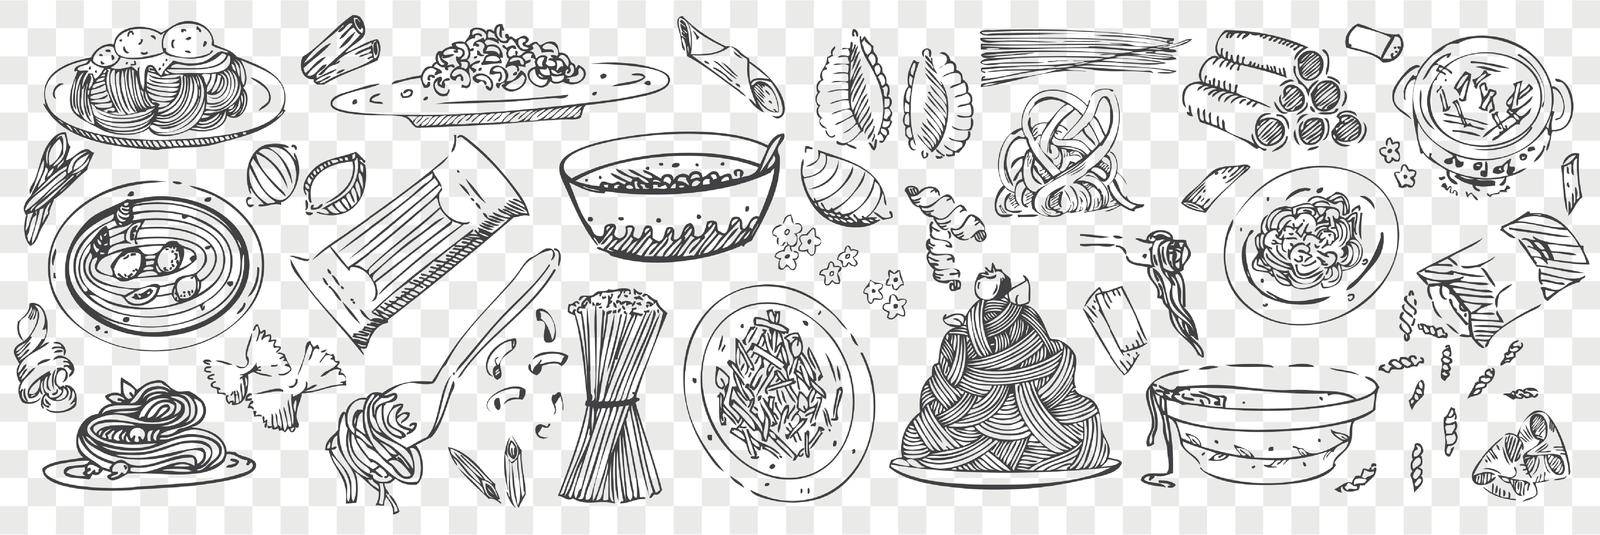 Hand drawn pasta doodles set. Collection of pen pencil or chalk drawing sketches tasty delicious dishes from noodles or italian macaroni. Cooking spaghetti penne illustration in transparent background